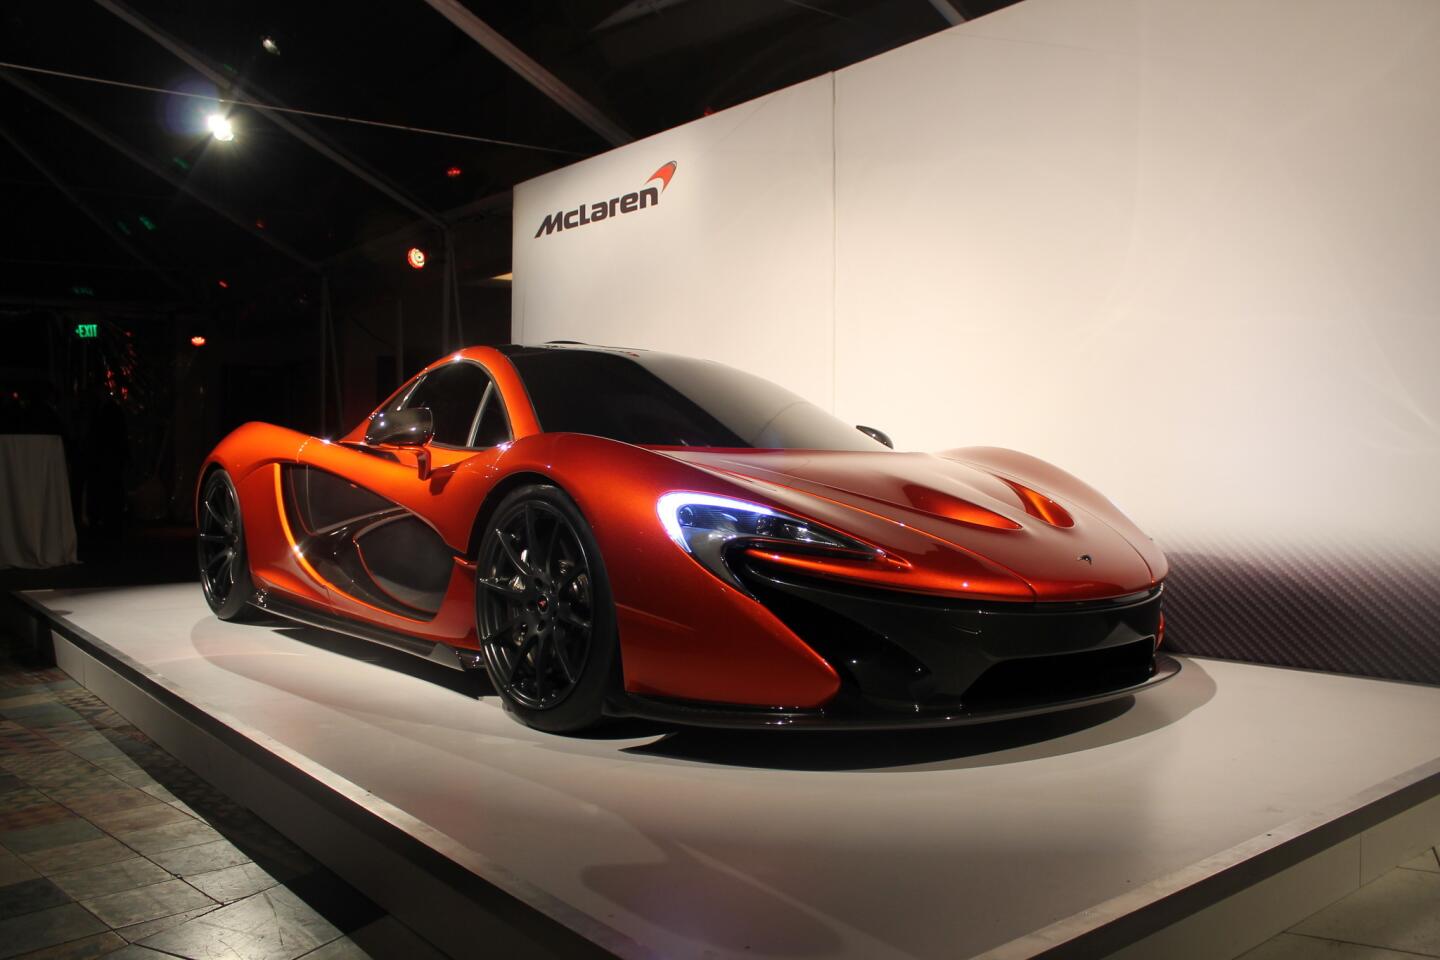 The McLaren P1 supercar made its L.A. debut Thursday night. The car will sell for more than a million dollars when it goes on sale in late 2013. Details on its powertrain will be unveiled at the Geneva Motor Show in March.